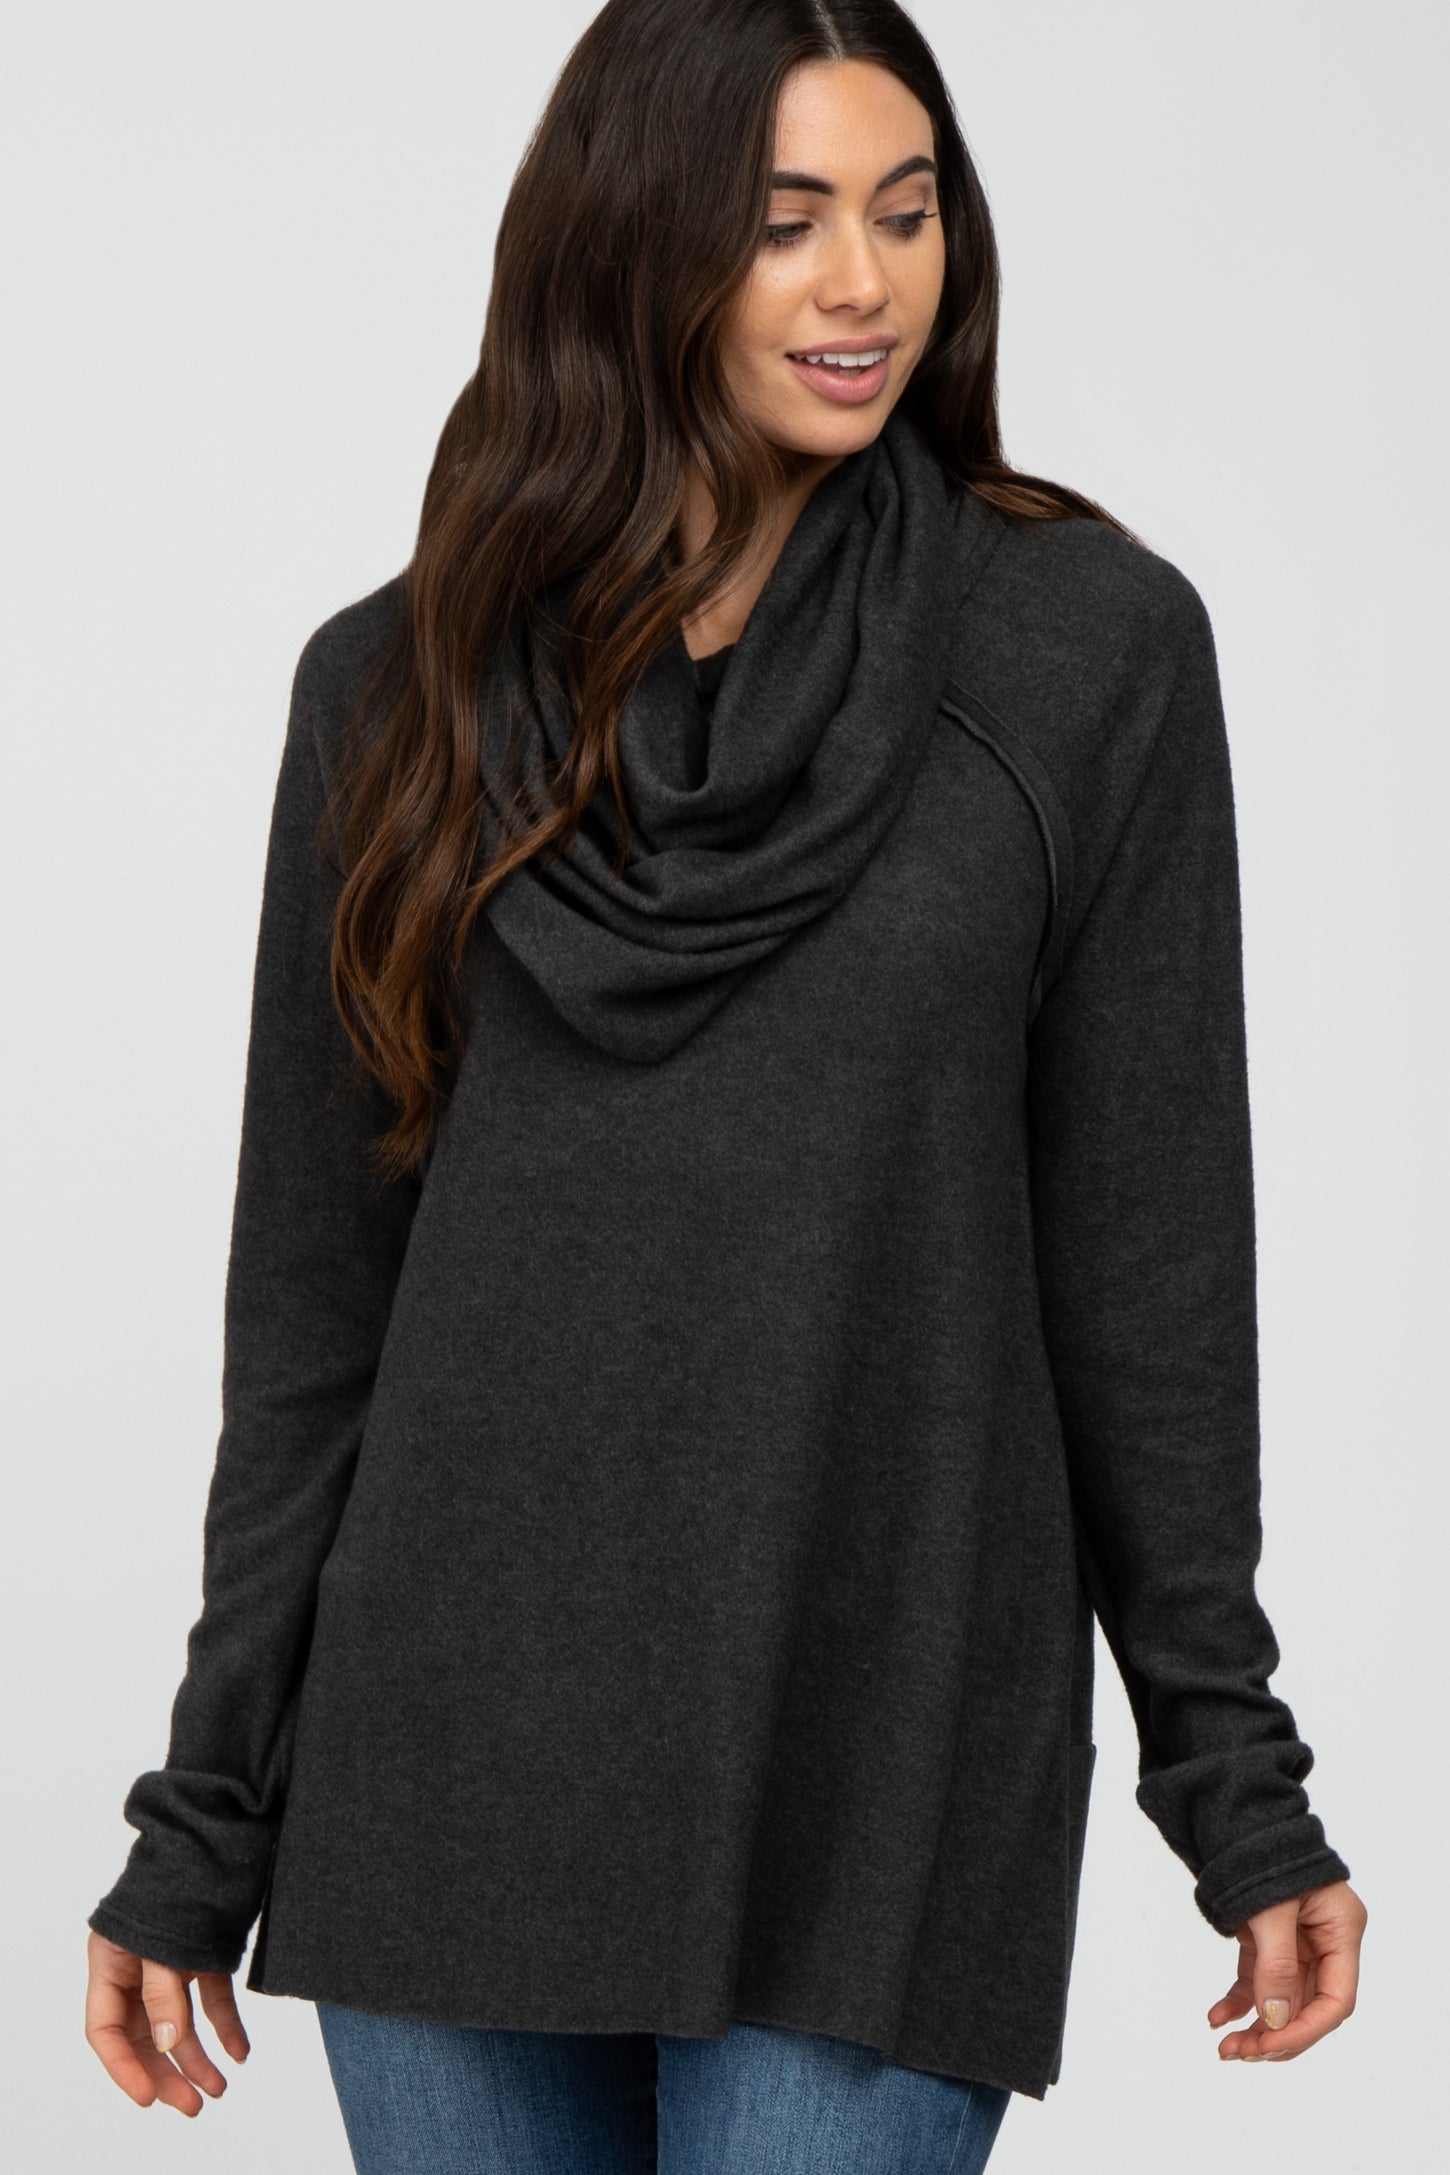 Charcoal Brushed Knit Cowl Neck Long Sleeve Maternity Top